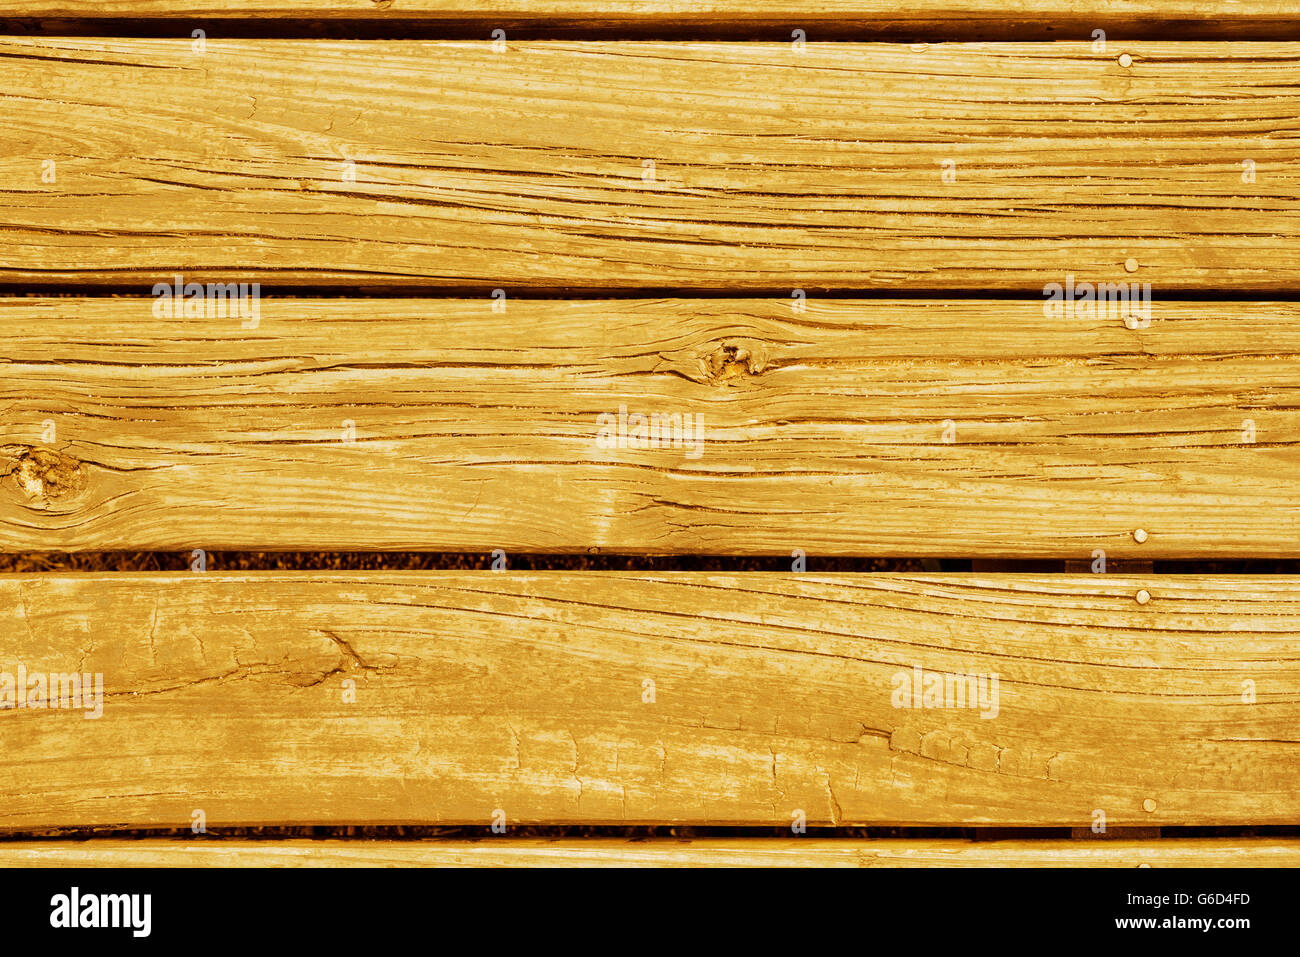 Colored wooden plank floor background, top view of vintage style rustic wood texture. Stock Photo